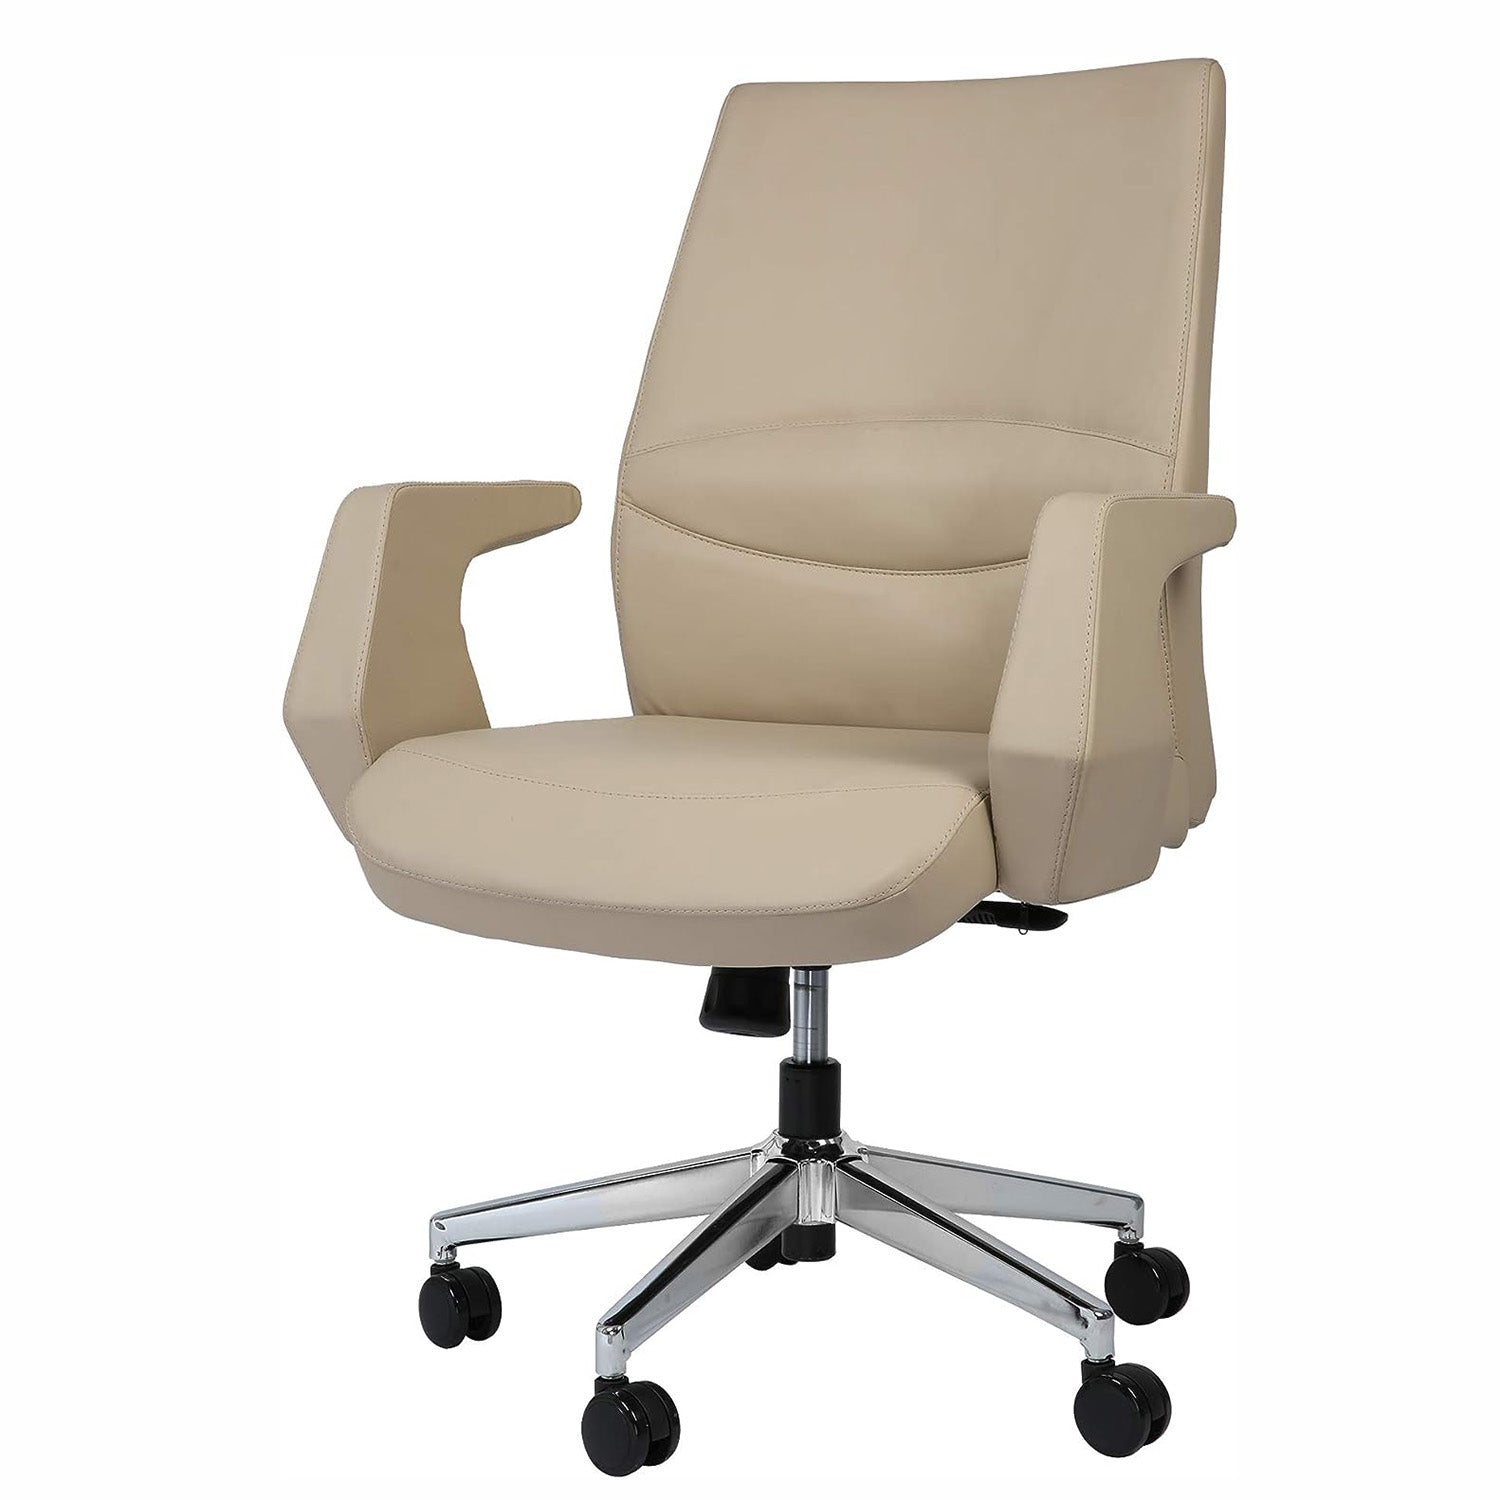 Executive Office Chair Ergonomic Leather Chair with Padded Armrests Lumbar Support